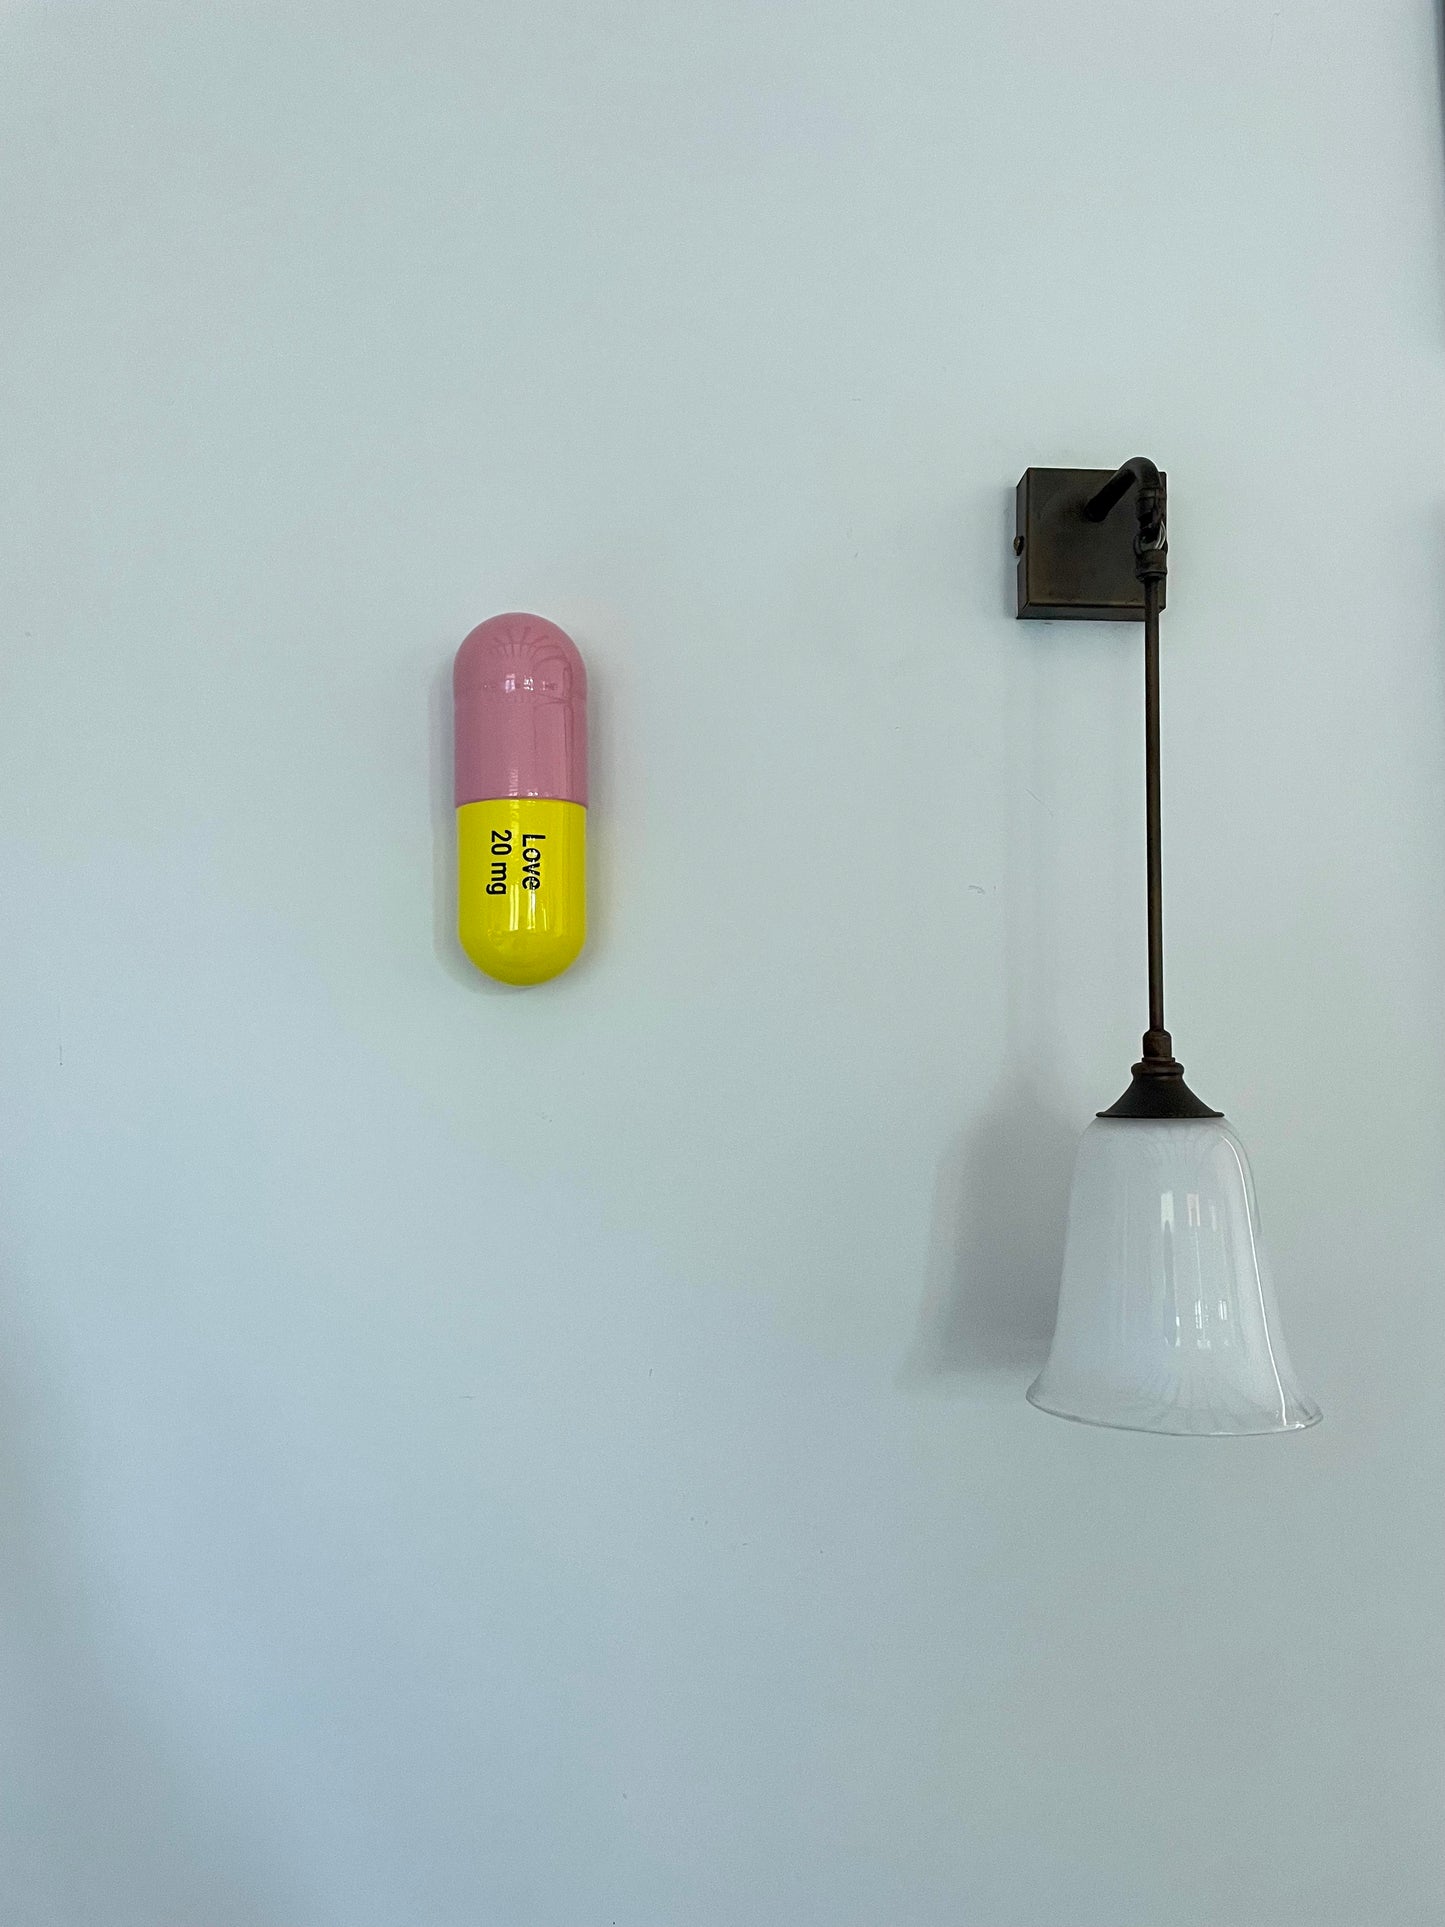 Ceramic Love Pill - Light Pink and Yellow